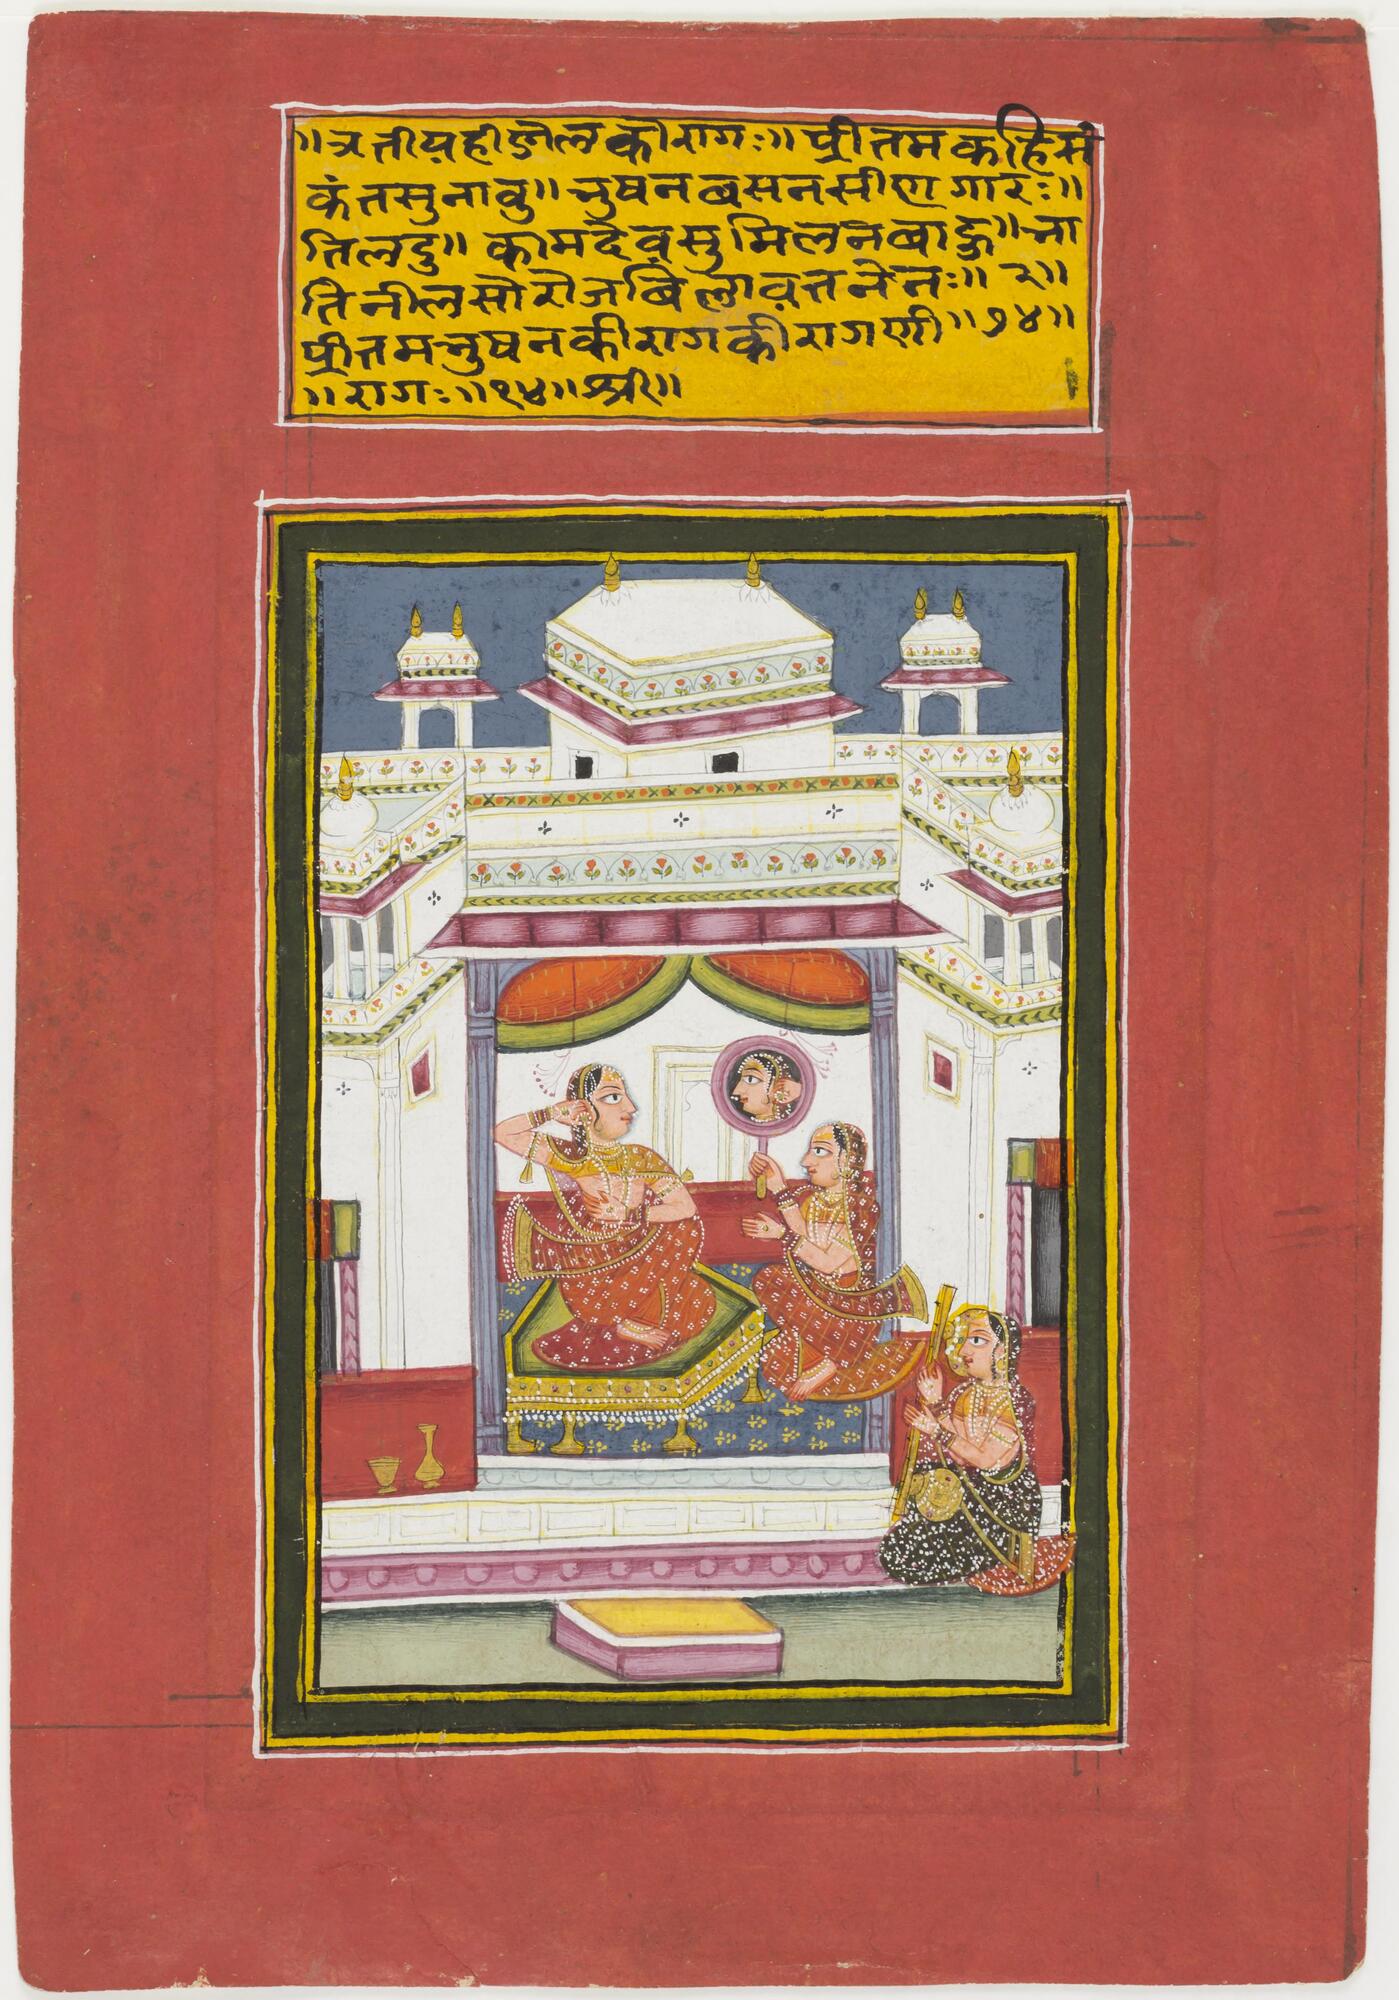 This miniature painting is placed on a red background with text written above it. In the center, a woman is adorning herself while looking at a mirror that is held by a female attendant. They are seated inside a marble pavilion, with projecting porches topped by cupolas and a small rooftop chamber. Another female attendent plays a string instrument to the side in the foreground.